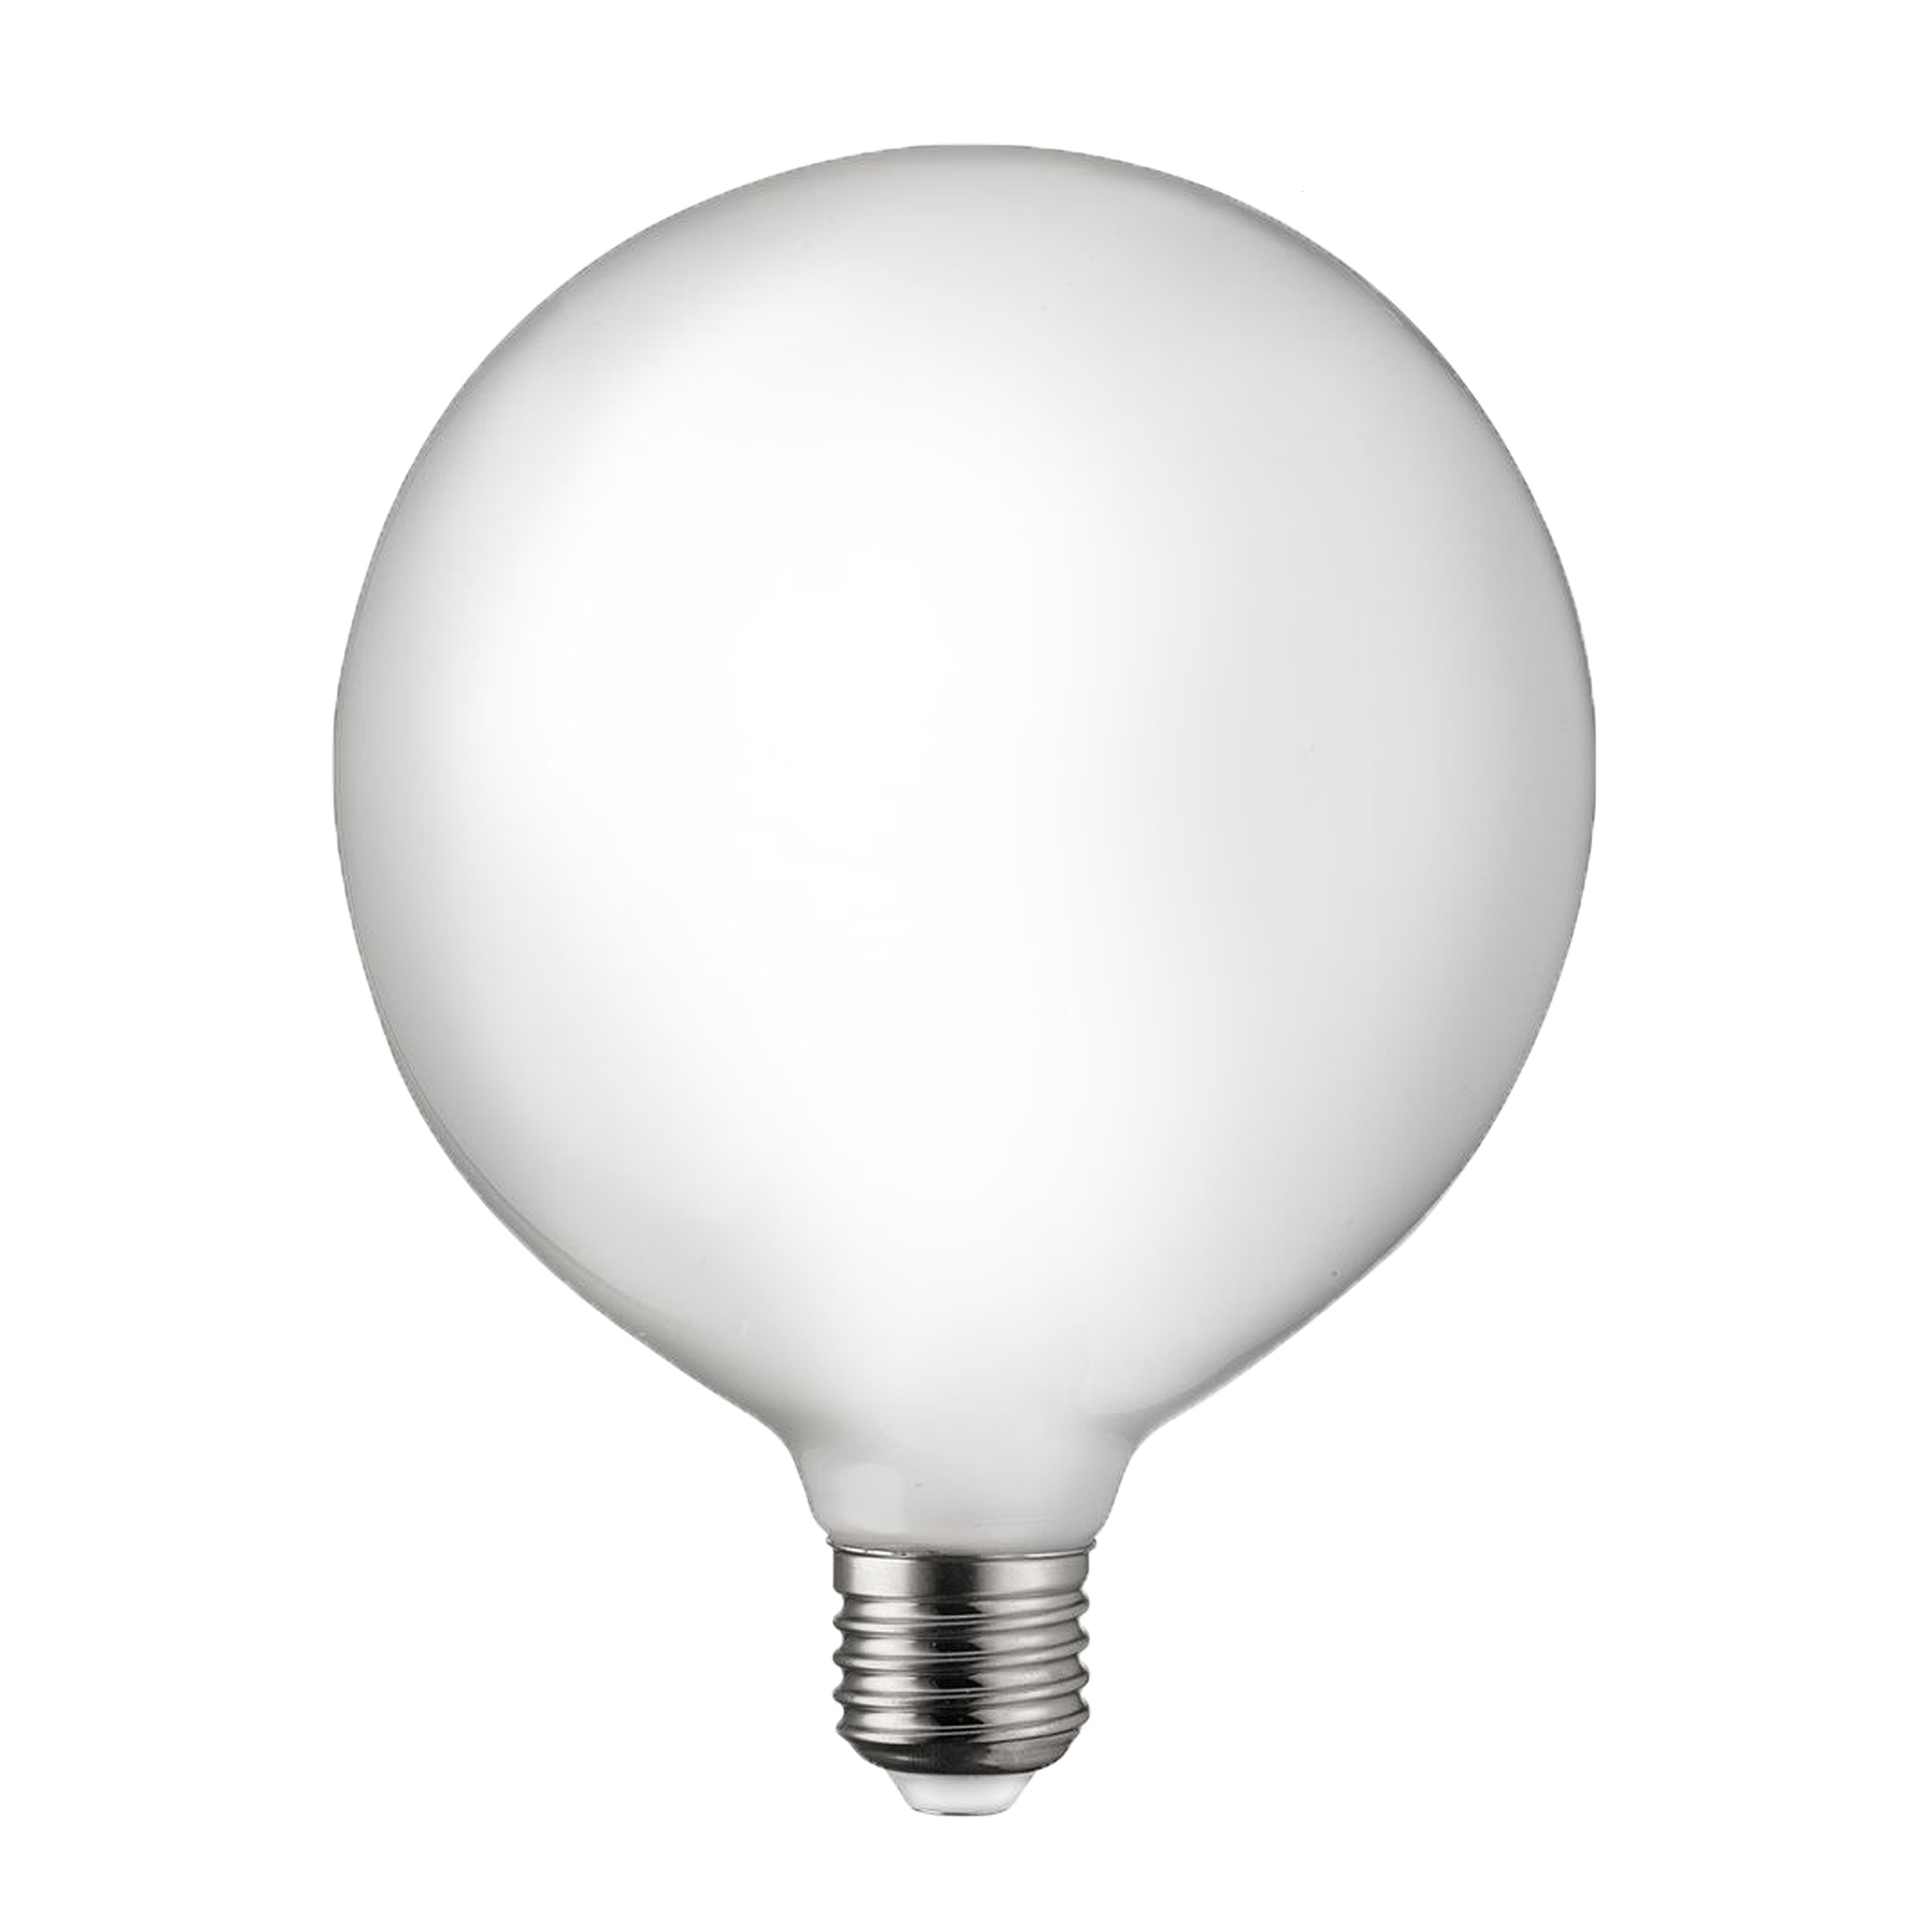 Ampoule LED grande taille dimmable type globe 5W E27 - Ampoules